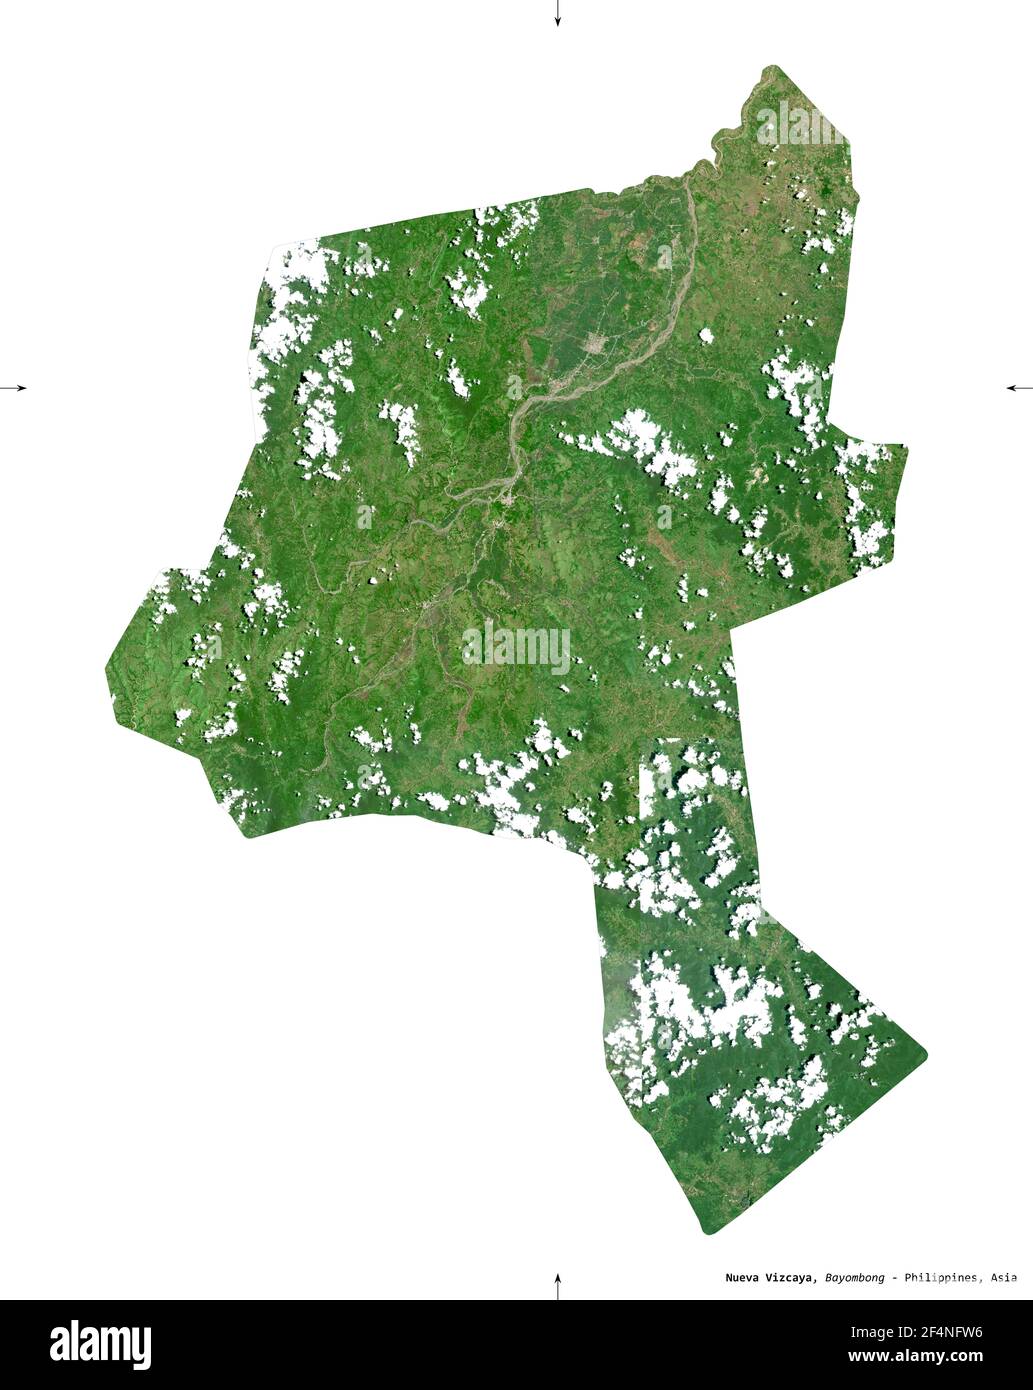 Nueva Vizcaya Province Of Philippines Sentinel 2 Satellite Imagery Shape Isolated On White Solid Description Location Of The Capital Contains Mo 2F4NFW6 